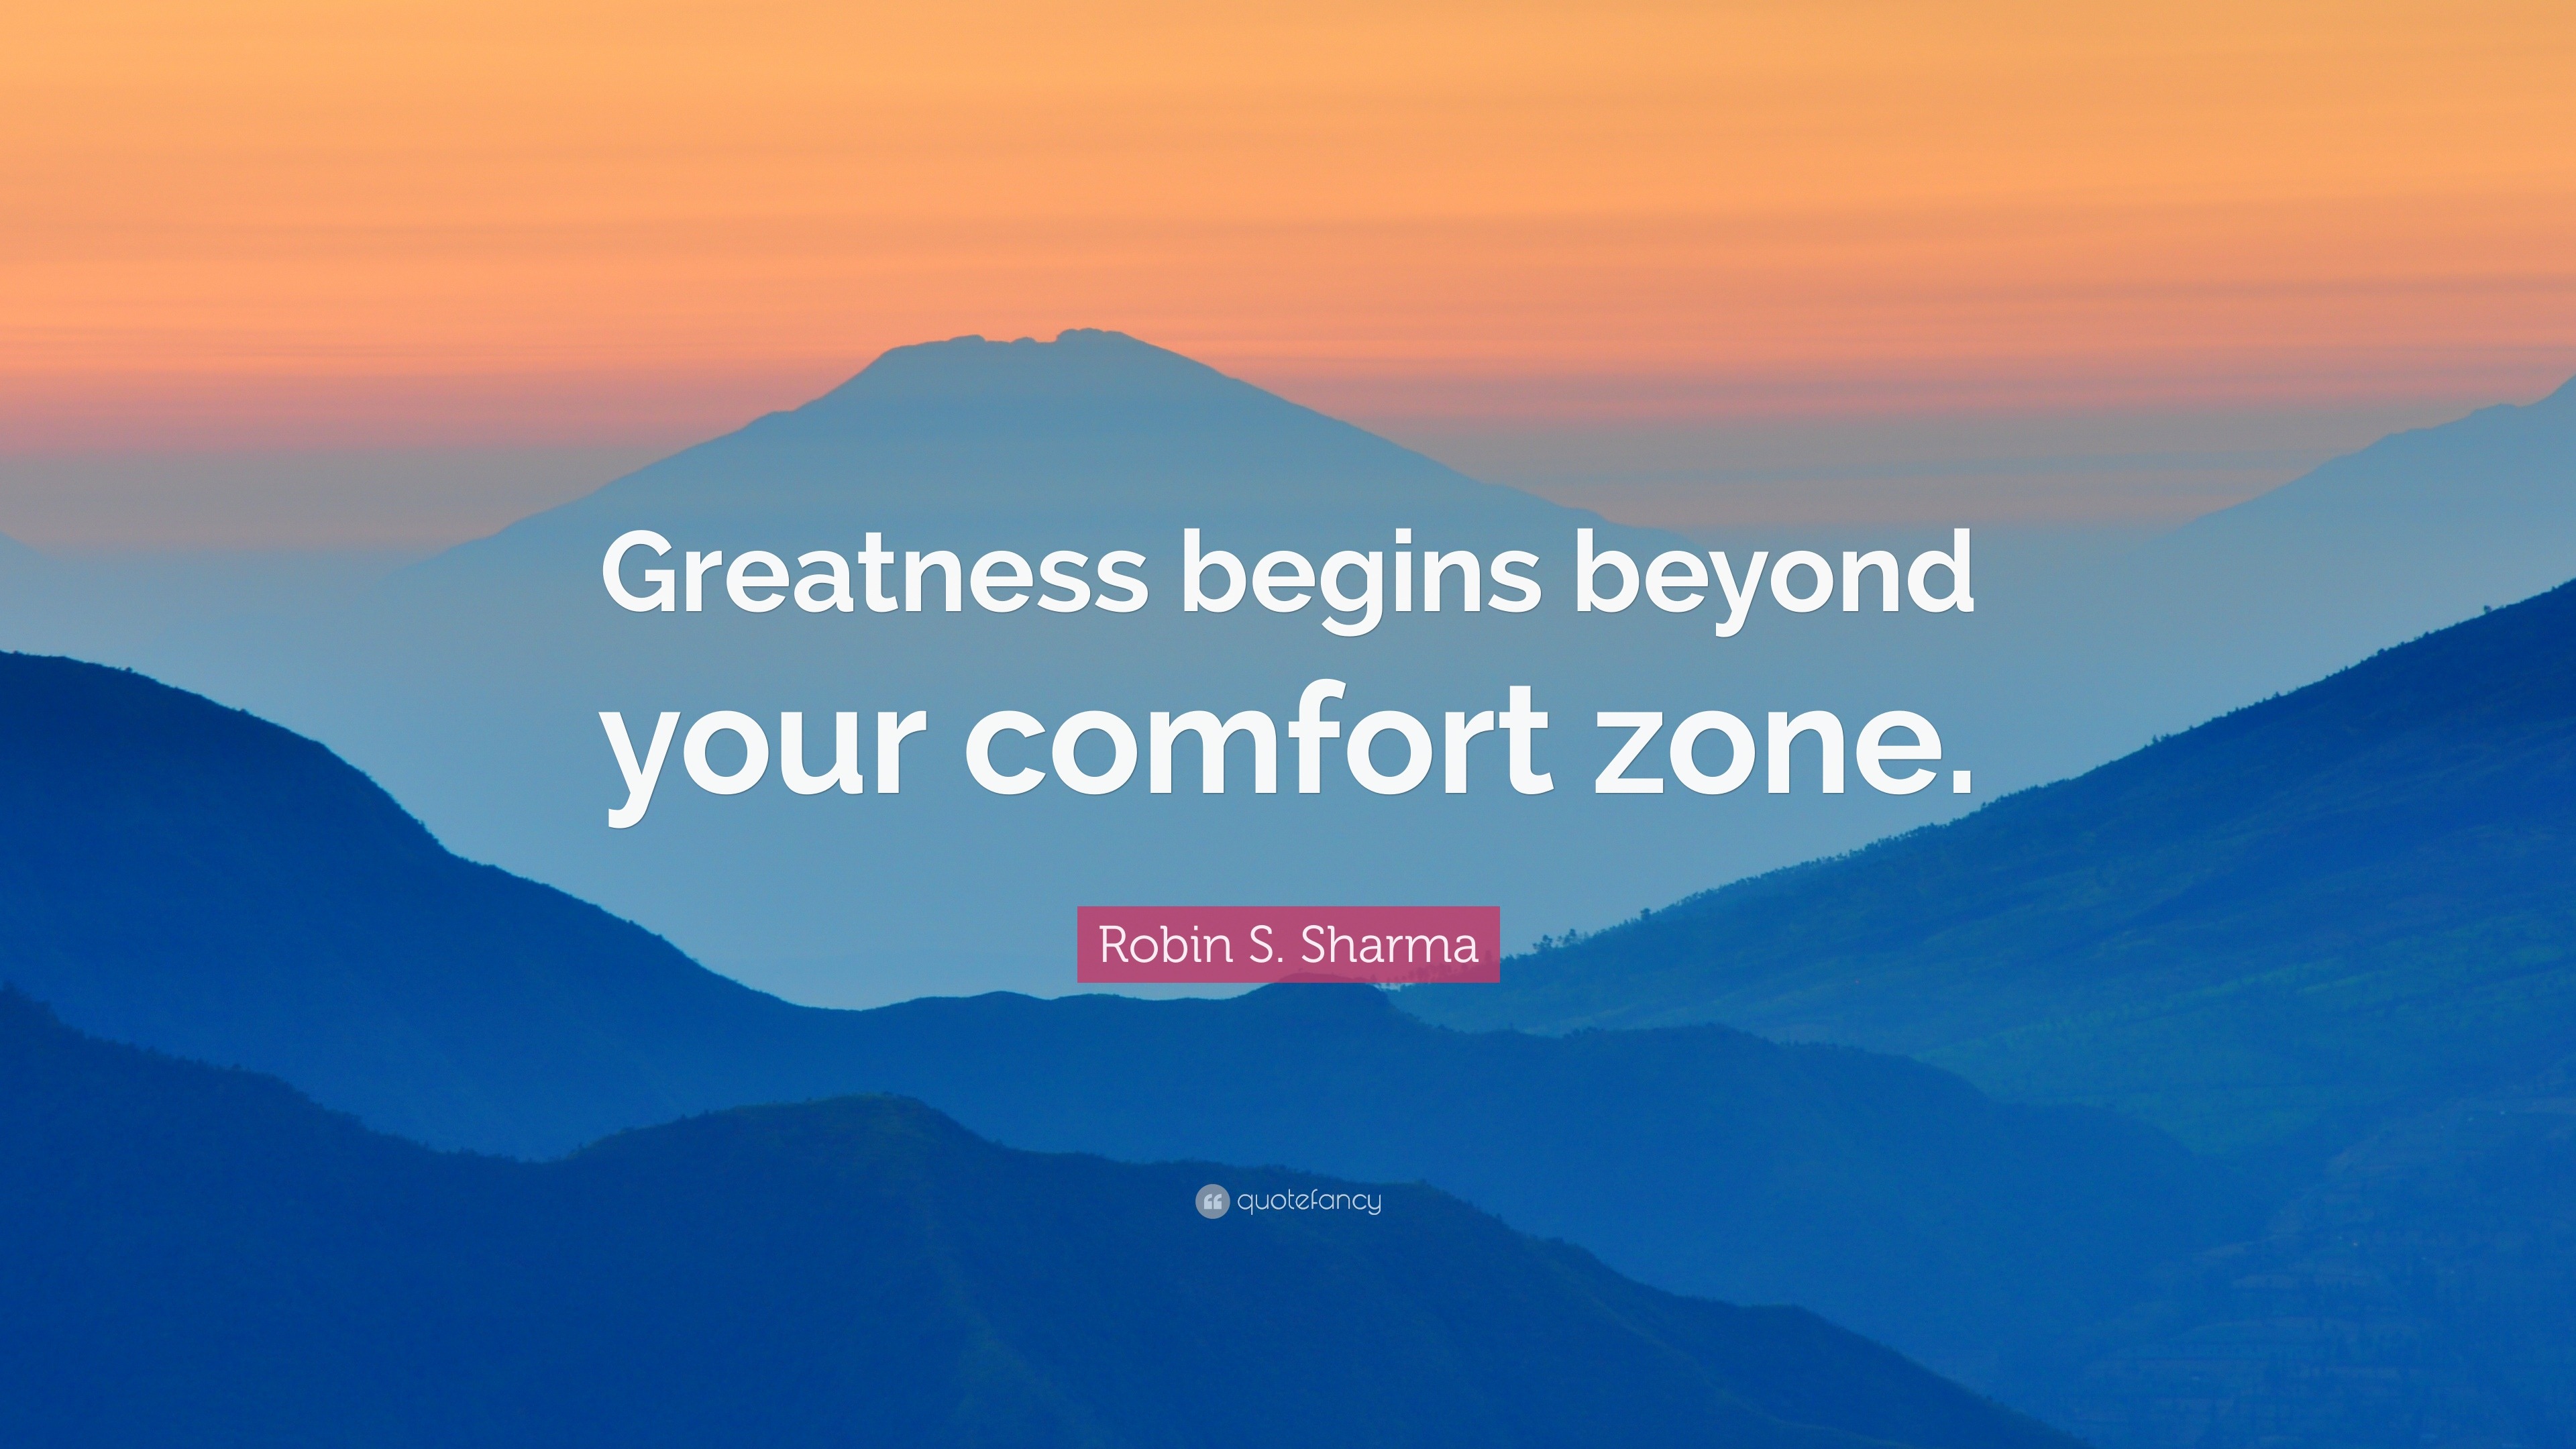 comfort zone beyond begins greatness quote quotes bandler richard requires adequate disappointment planning sharma robin wallpapers quotefancy